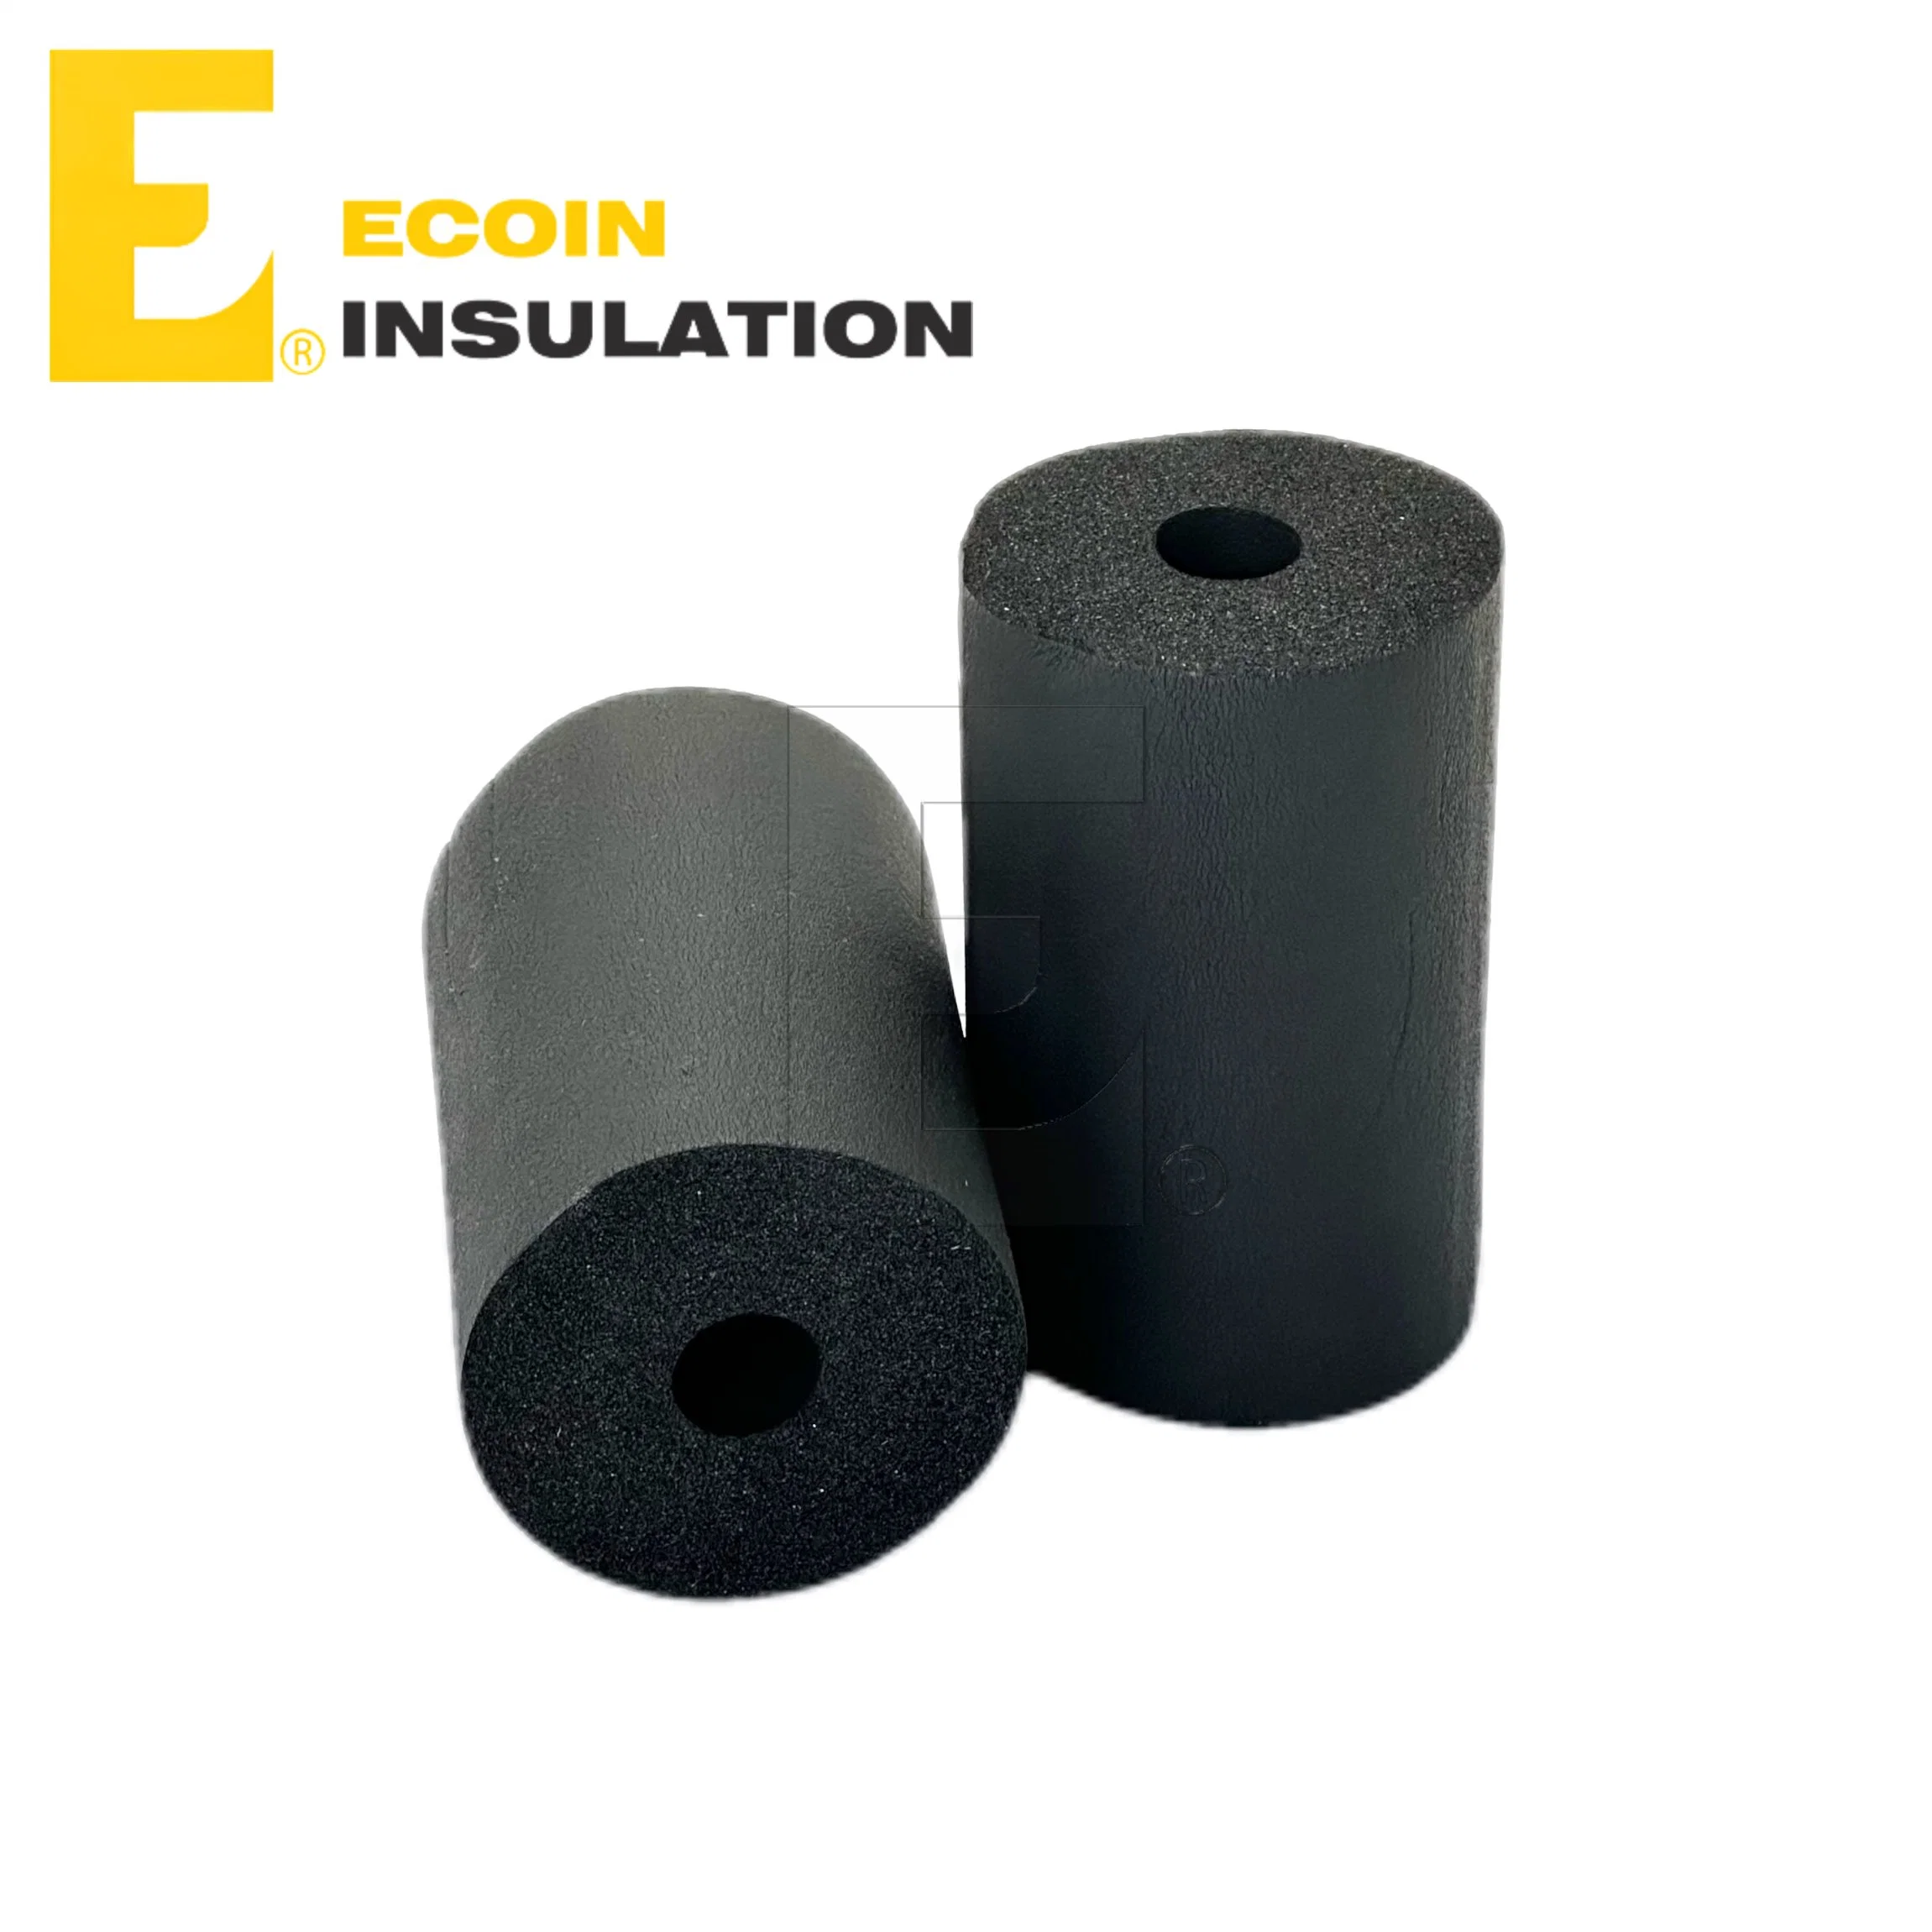 Soft Plastic Pipes High-Temperature Rubber Foam Pipe Insulation Black Rubber Foam Insulation Tubes for Air Duct